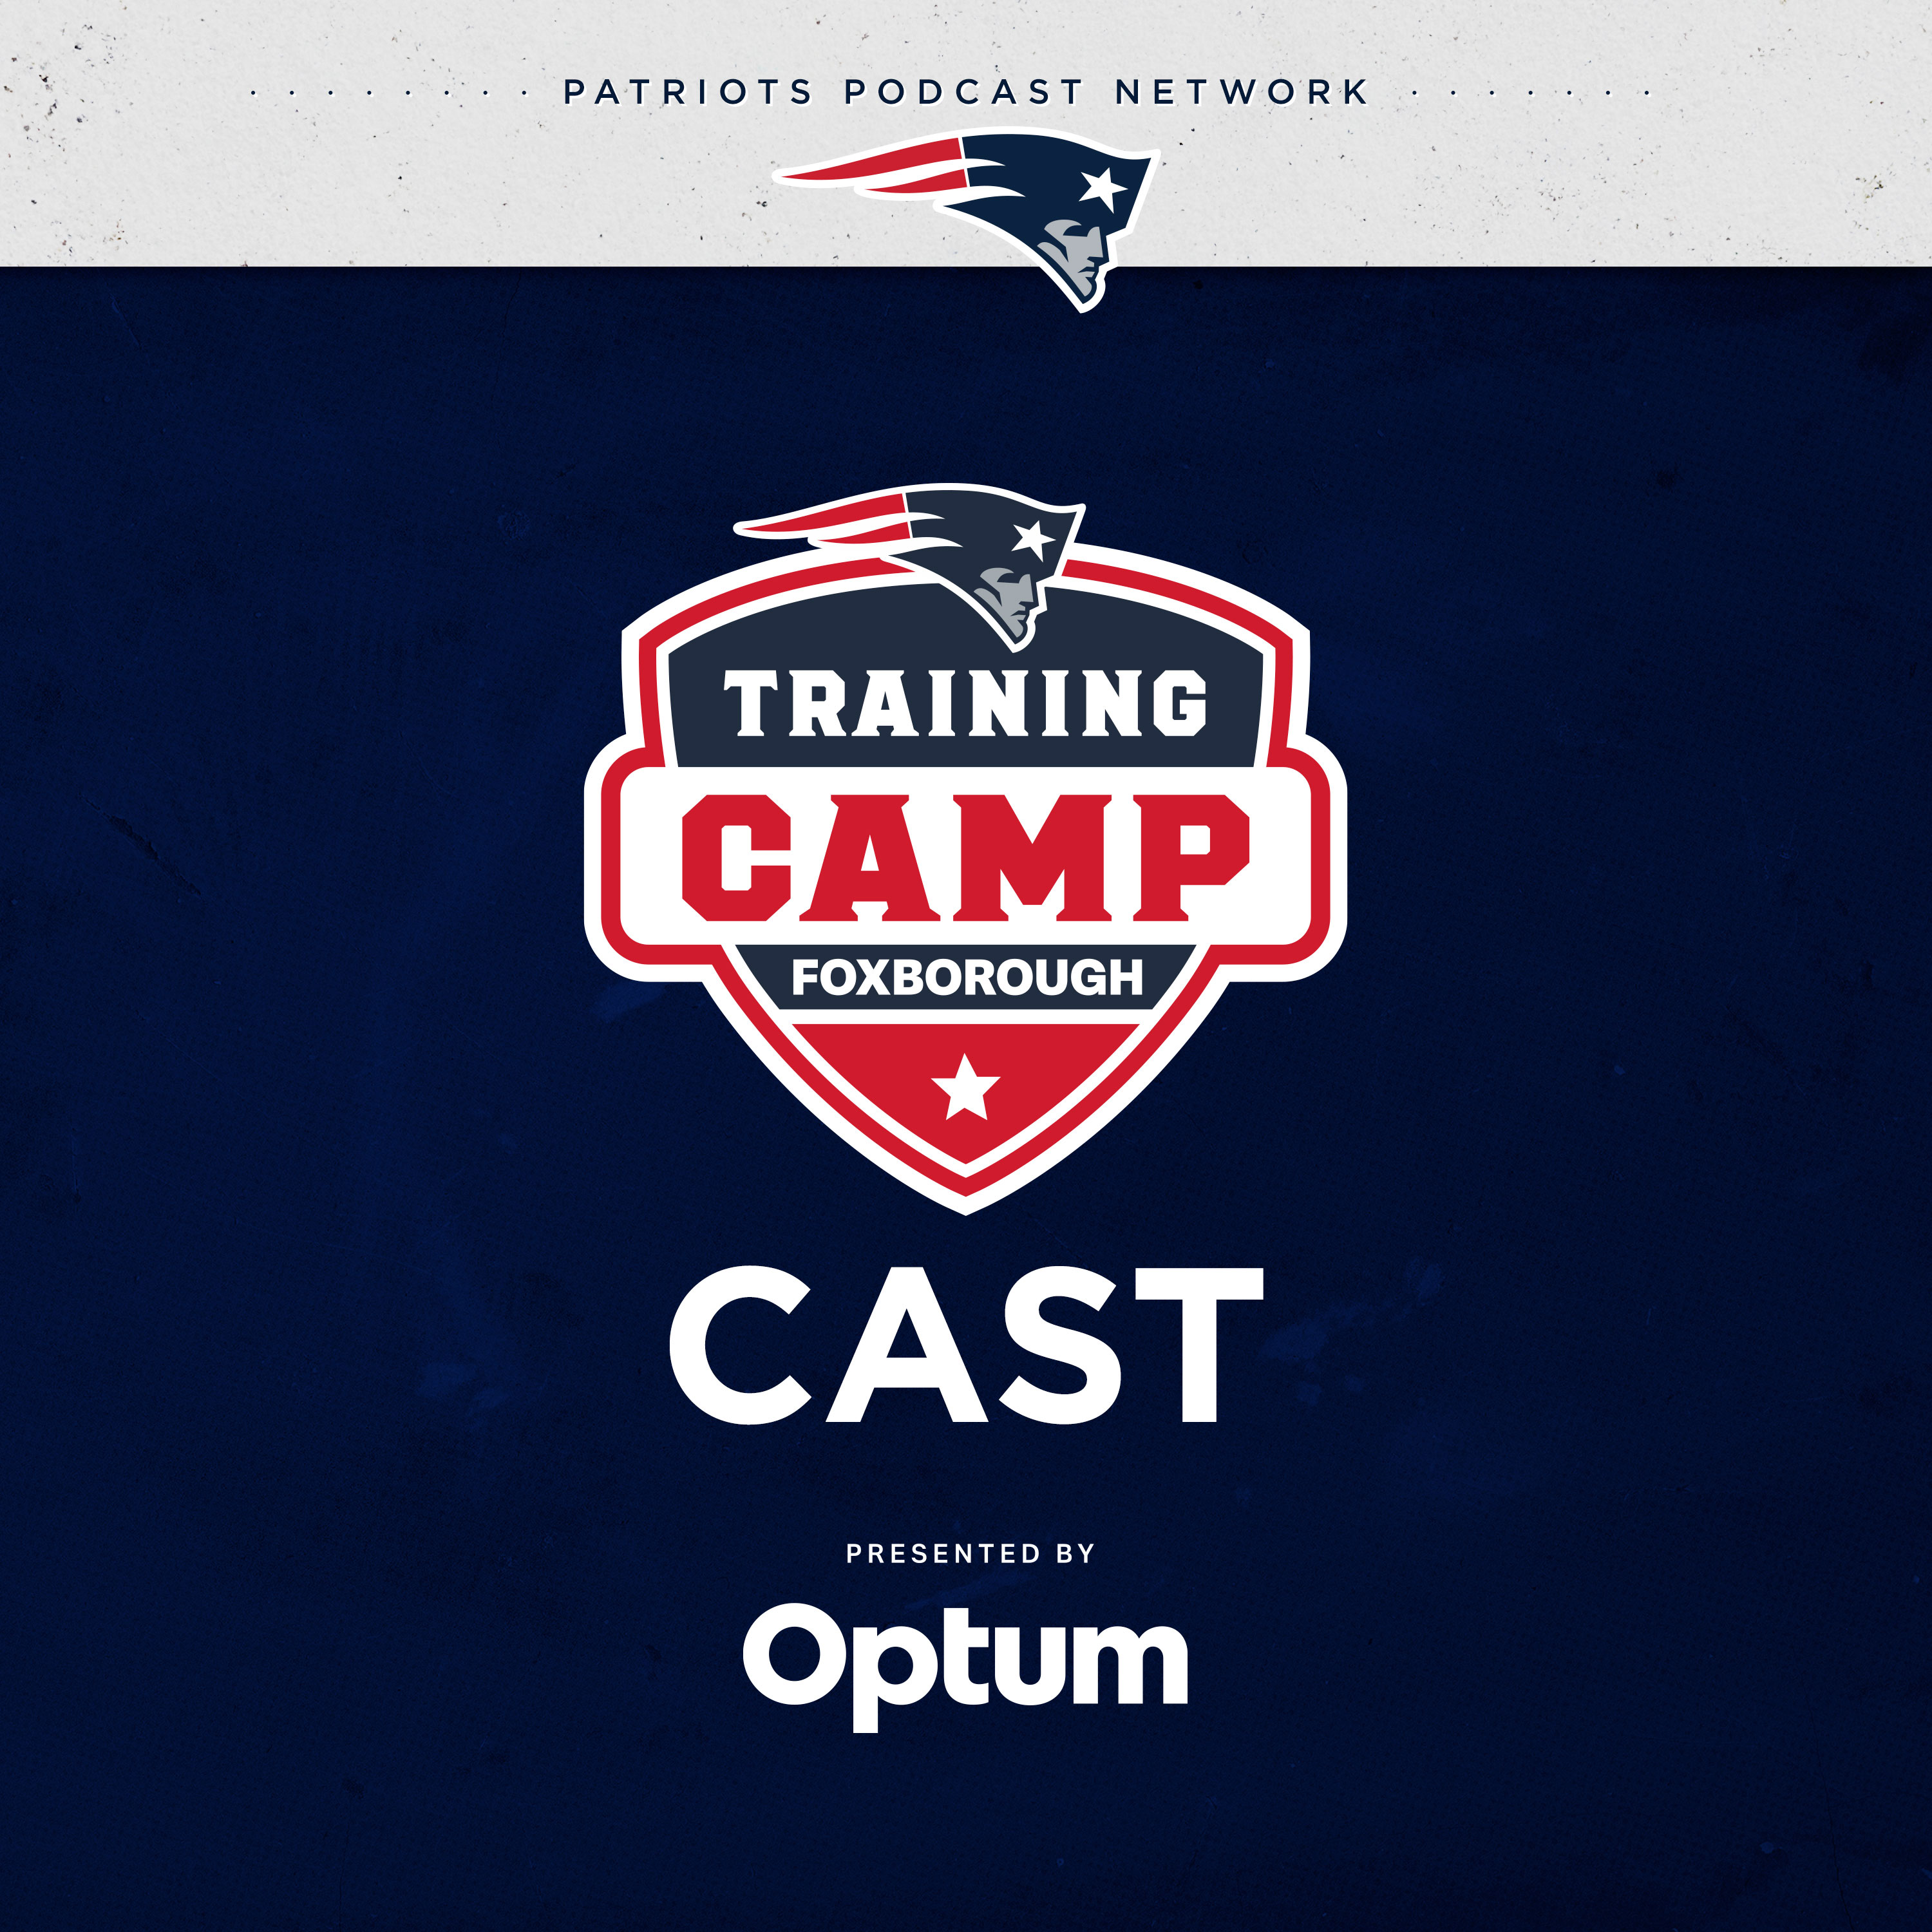 Training Camp Cast 8/7: Day 11 Recap, Patriots Practice in the Rain in Pads, Referees Present